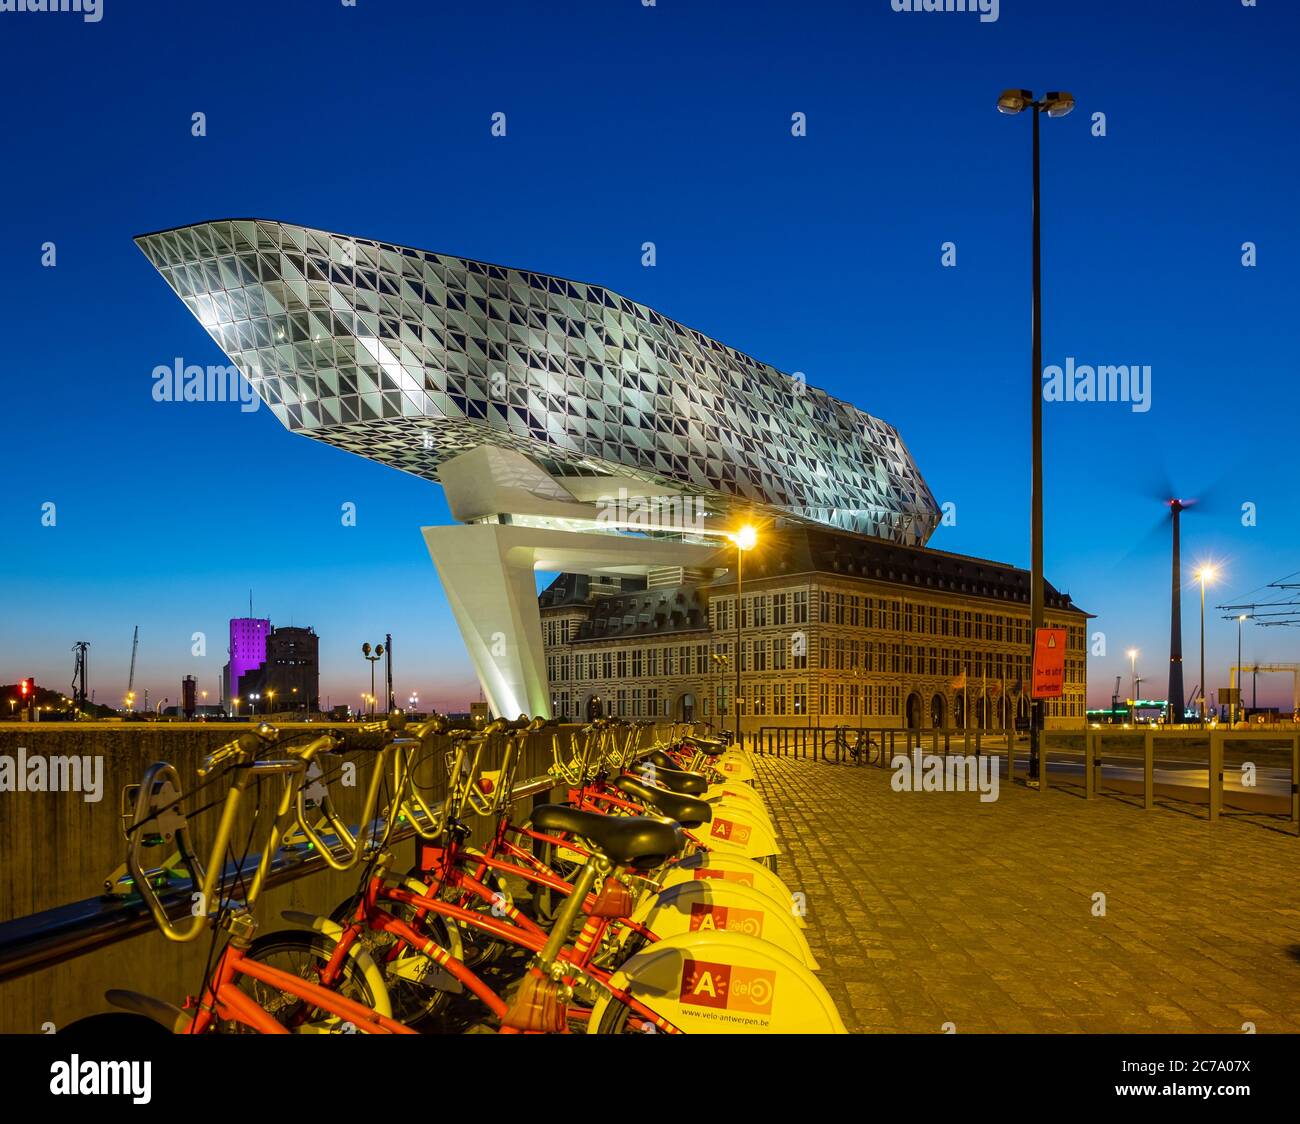 Antwerp Port House at night with a line of Antwerp City bikes Stock Photo